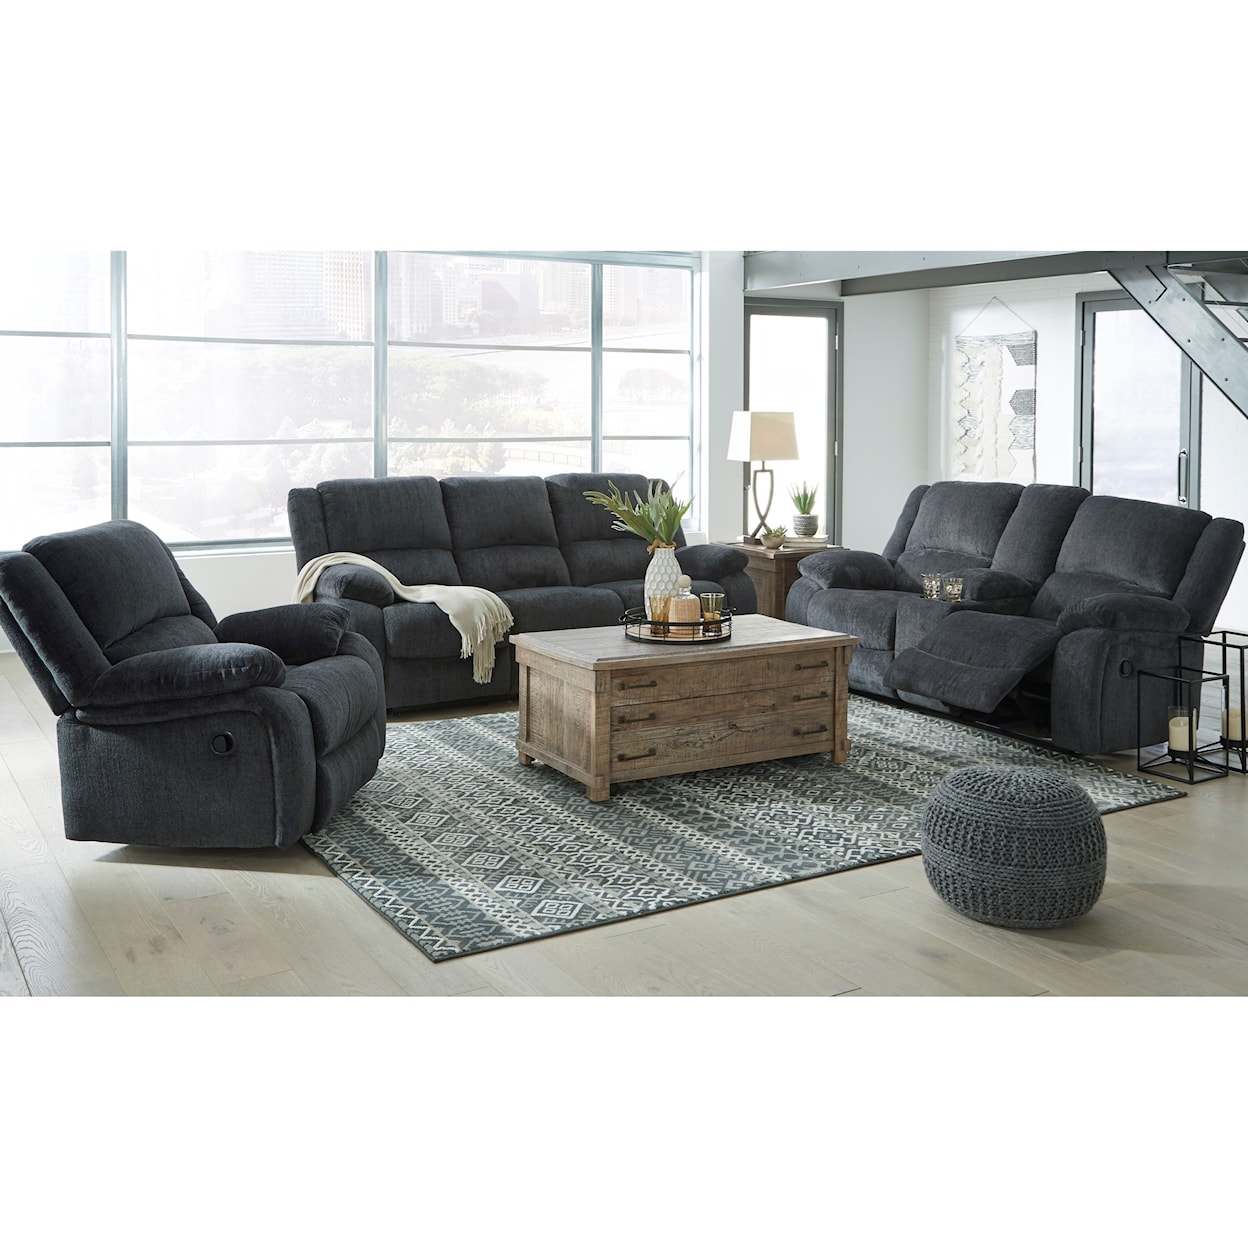 Ashley Furniture Signature Design Draycoll Power Reclining Living Room Group